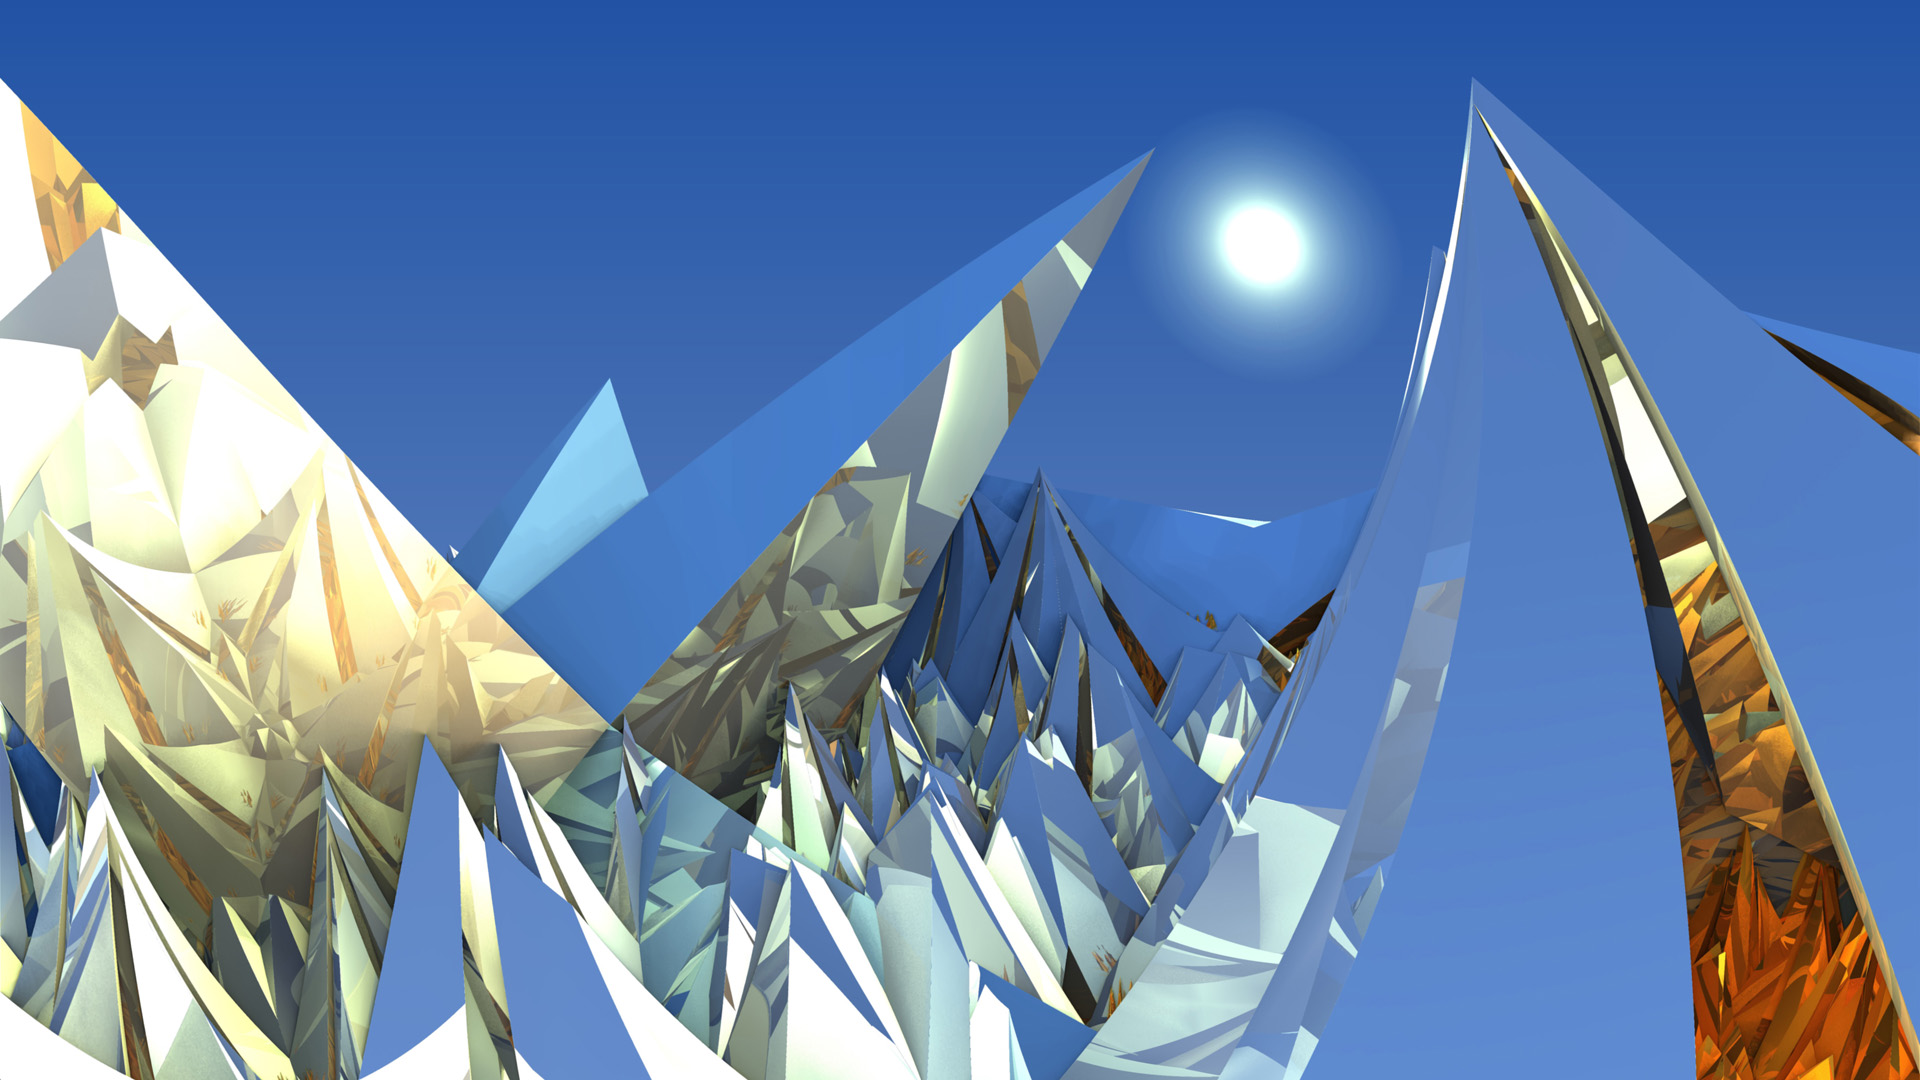 3d, abstract, fractal, blue, cgi, geometry, mandelbulb 3d, reflection, spikes, white